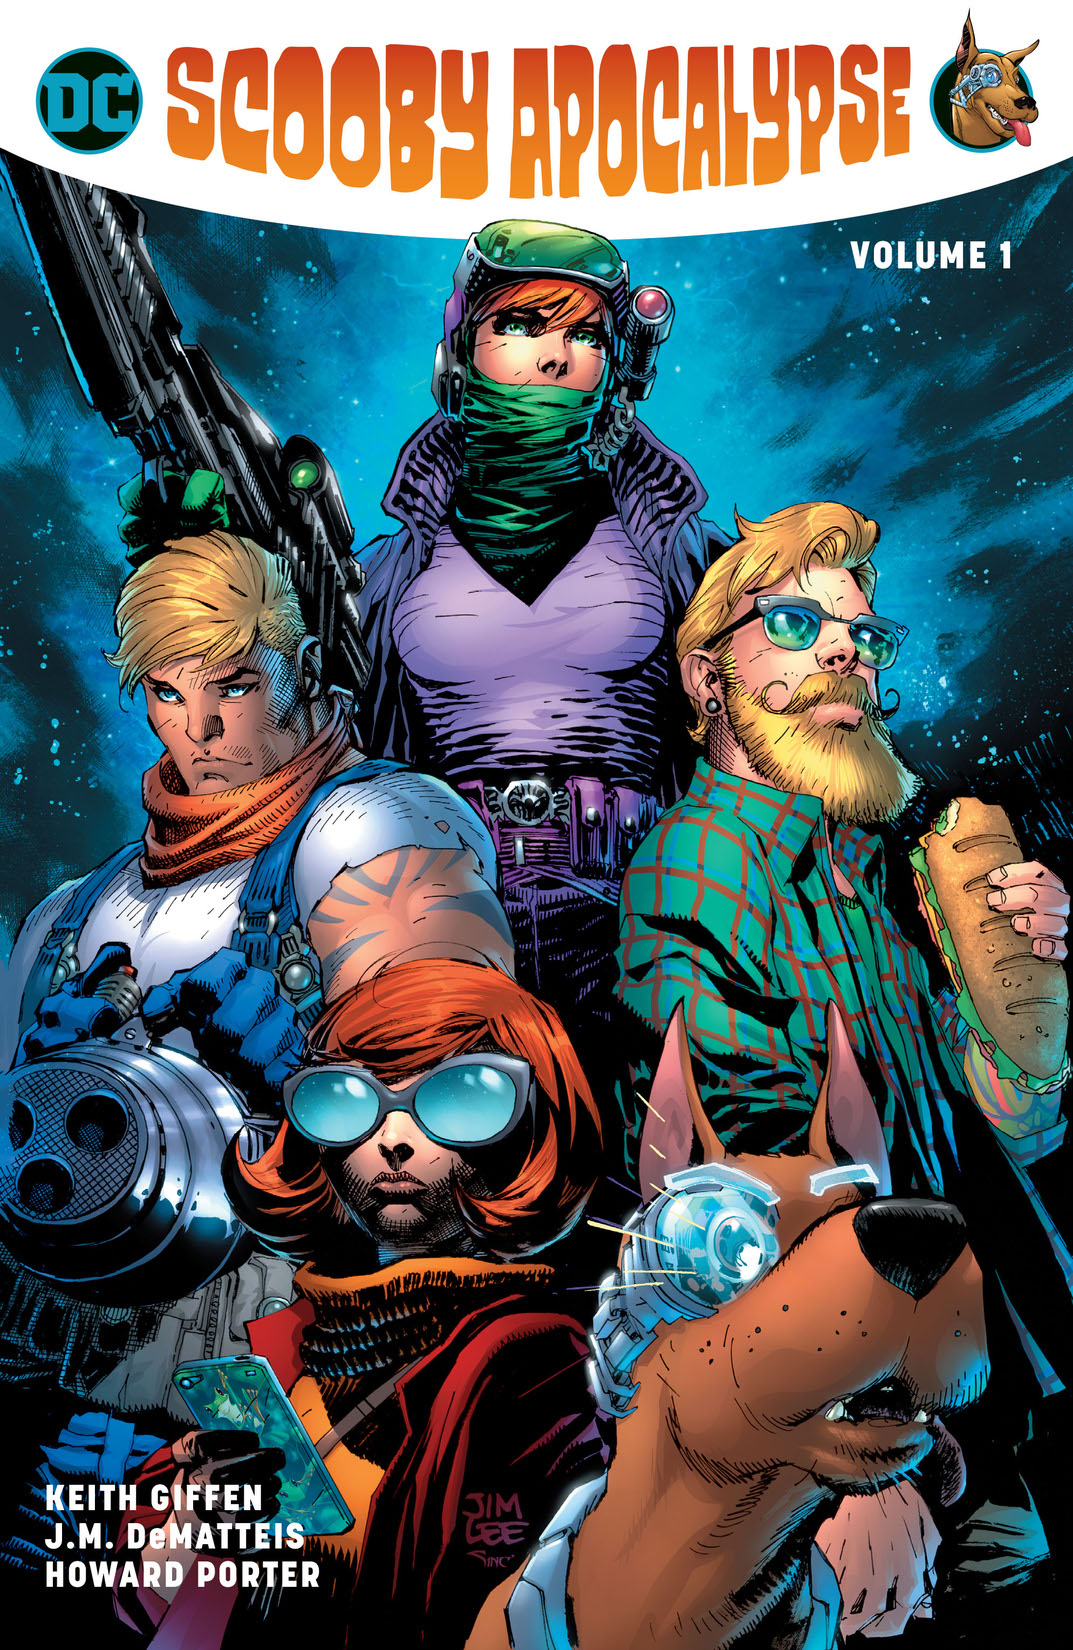 The Scooby Apocalypse Vol. 1 preview images